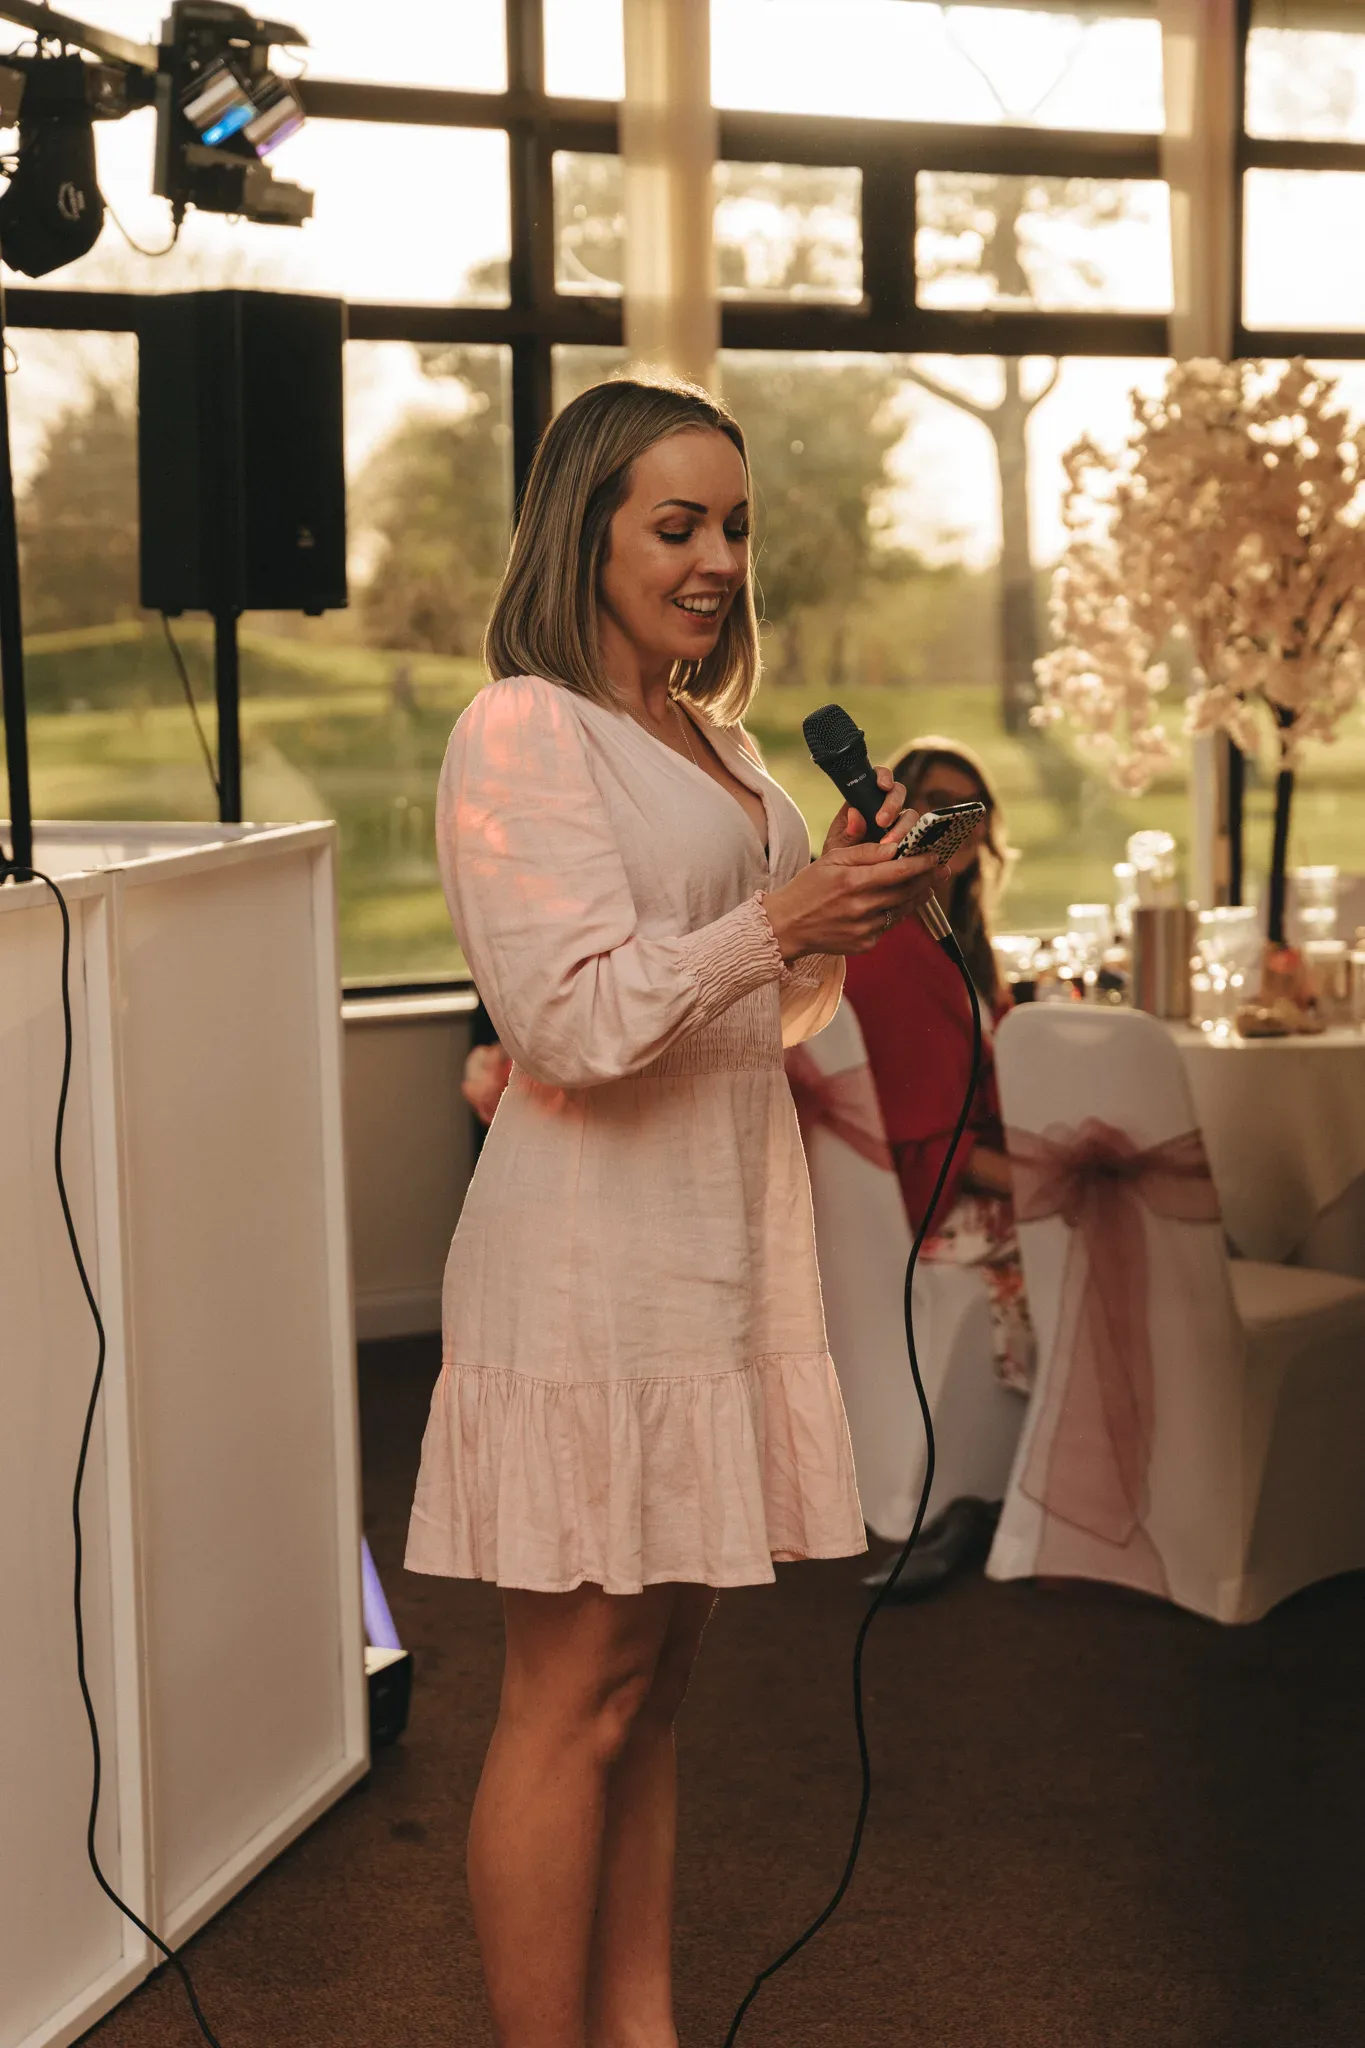 A woman in a light pink dress smiles as she gives a speech, holding a microphone and a smartphone. she stands indoors, with large windows and decorative seating in the background.